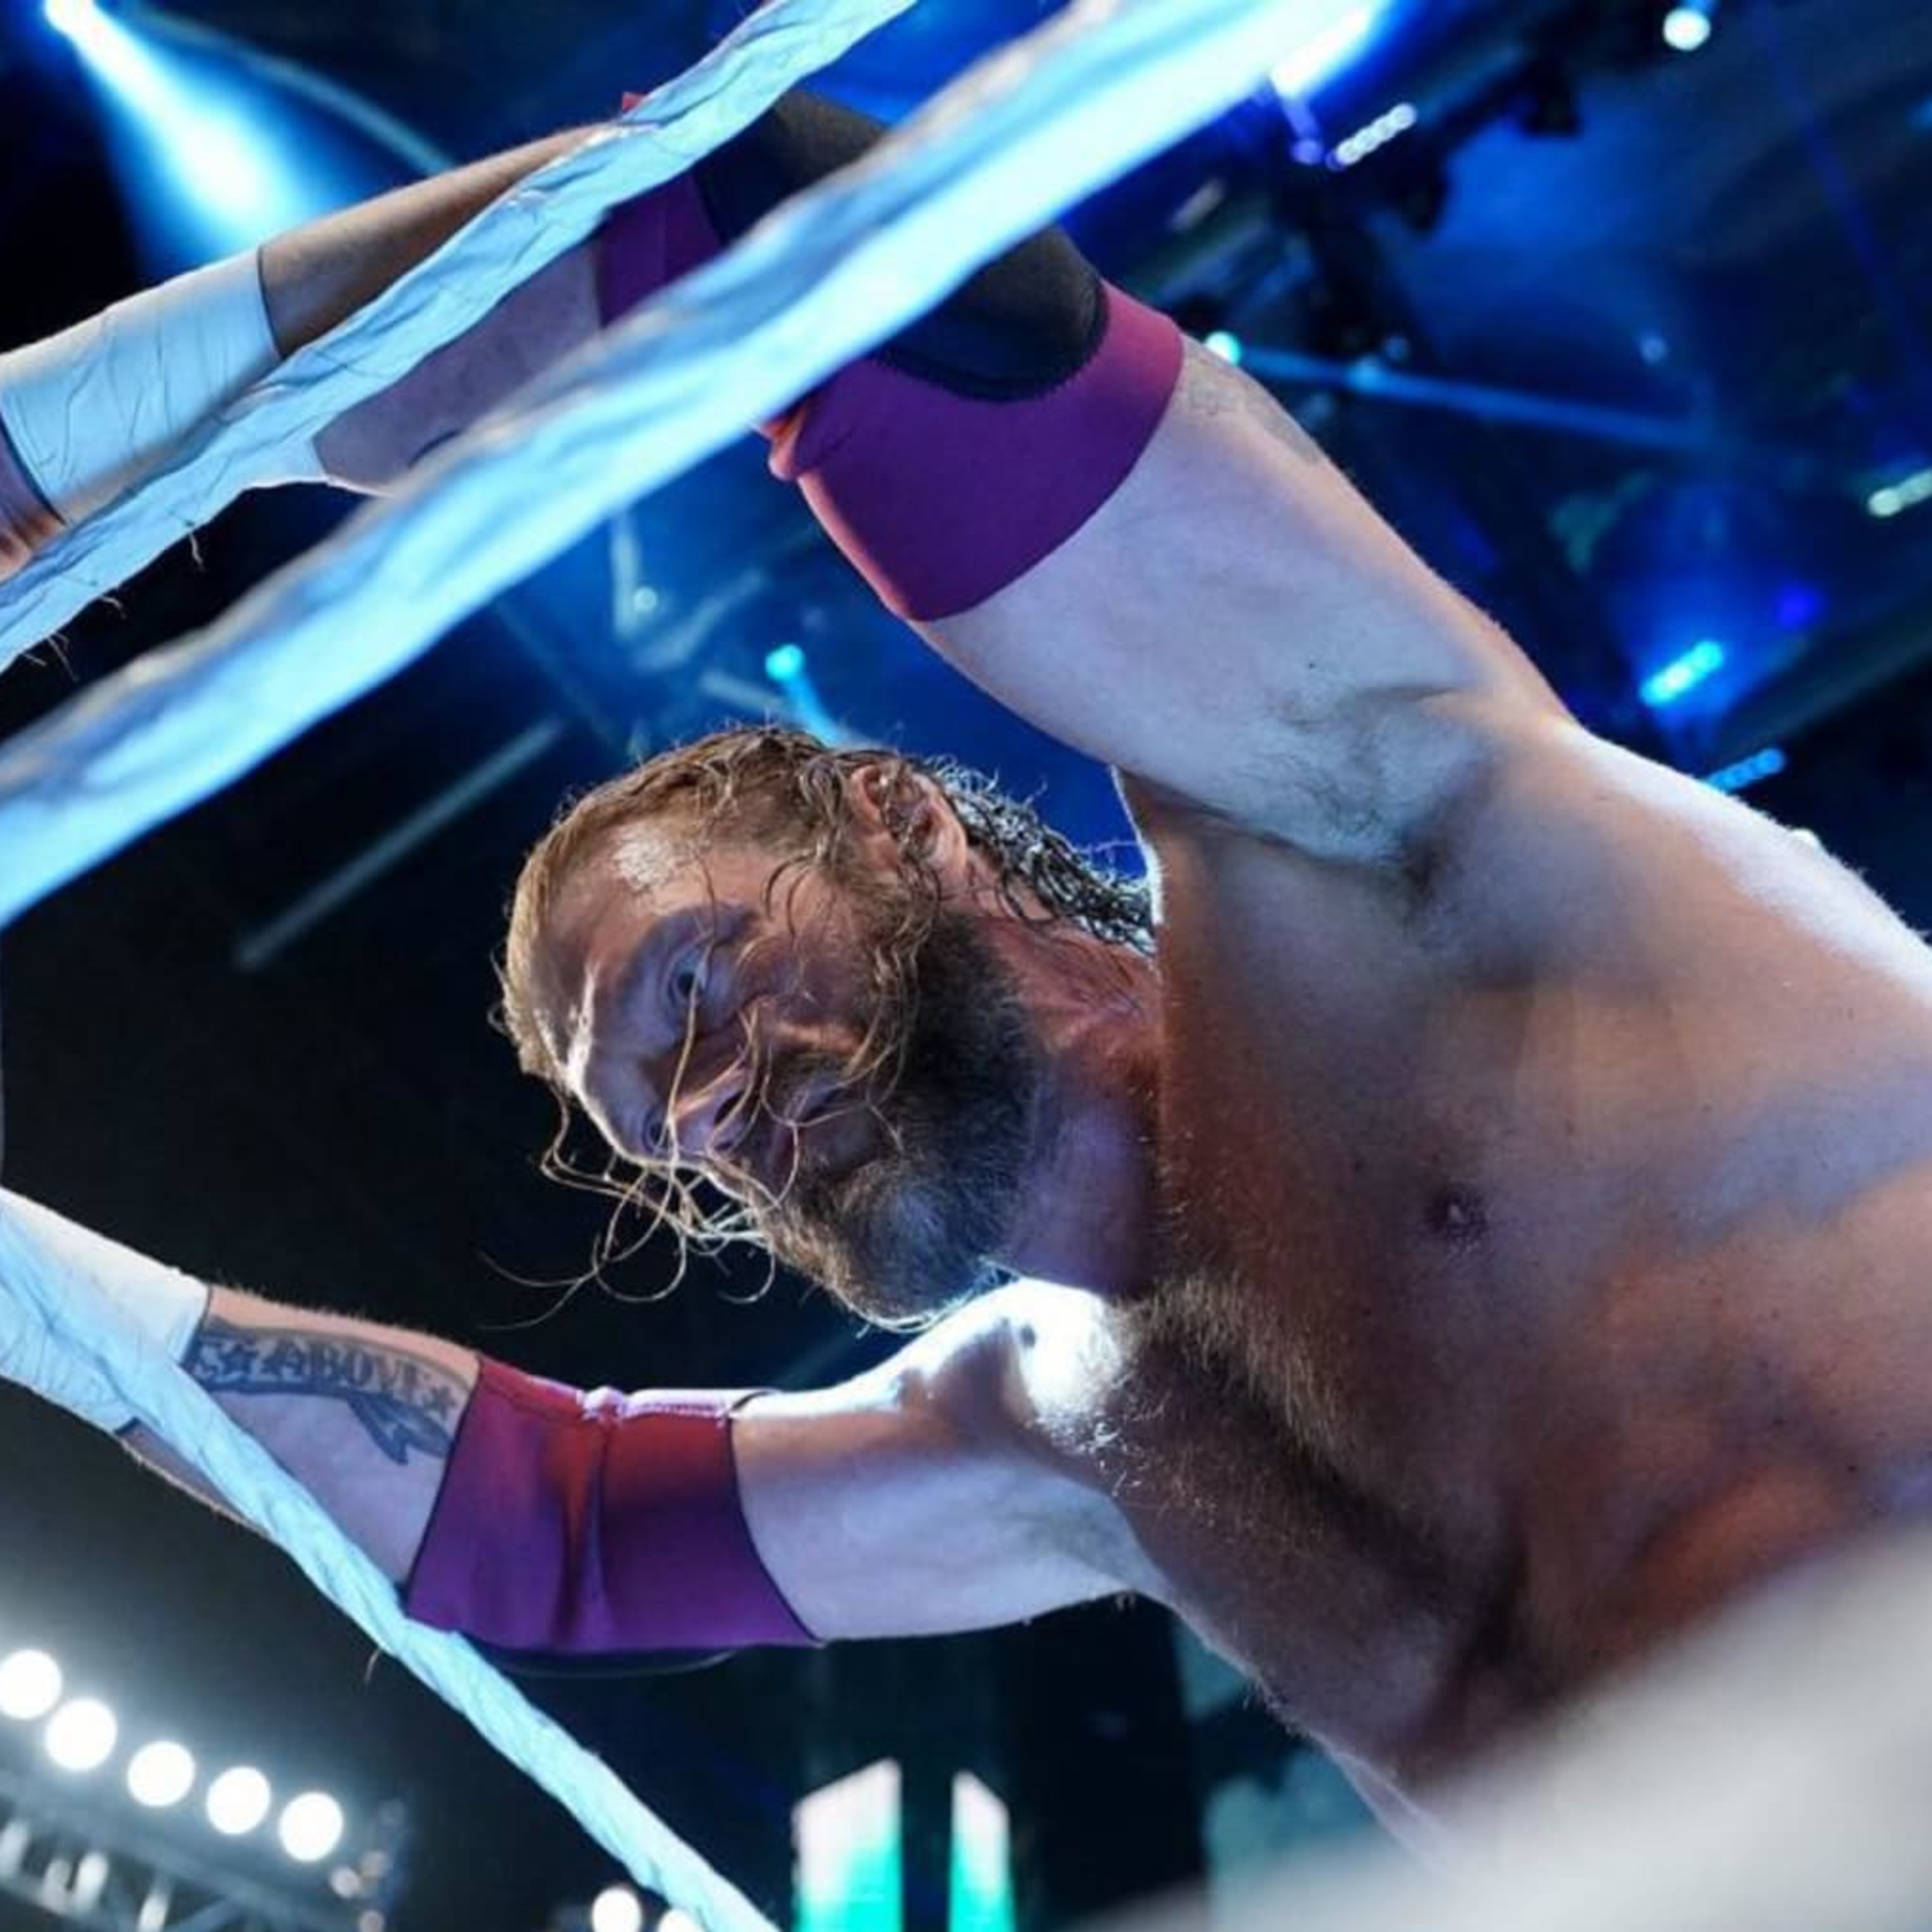 Backstage WWE and AEW Rumors: Latest on Edge, Kenny Omega and More